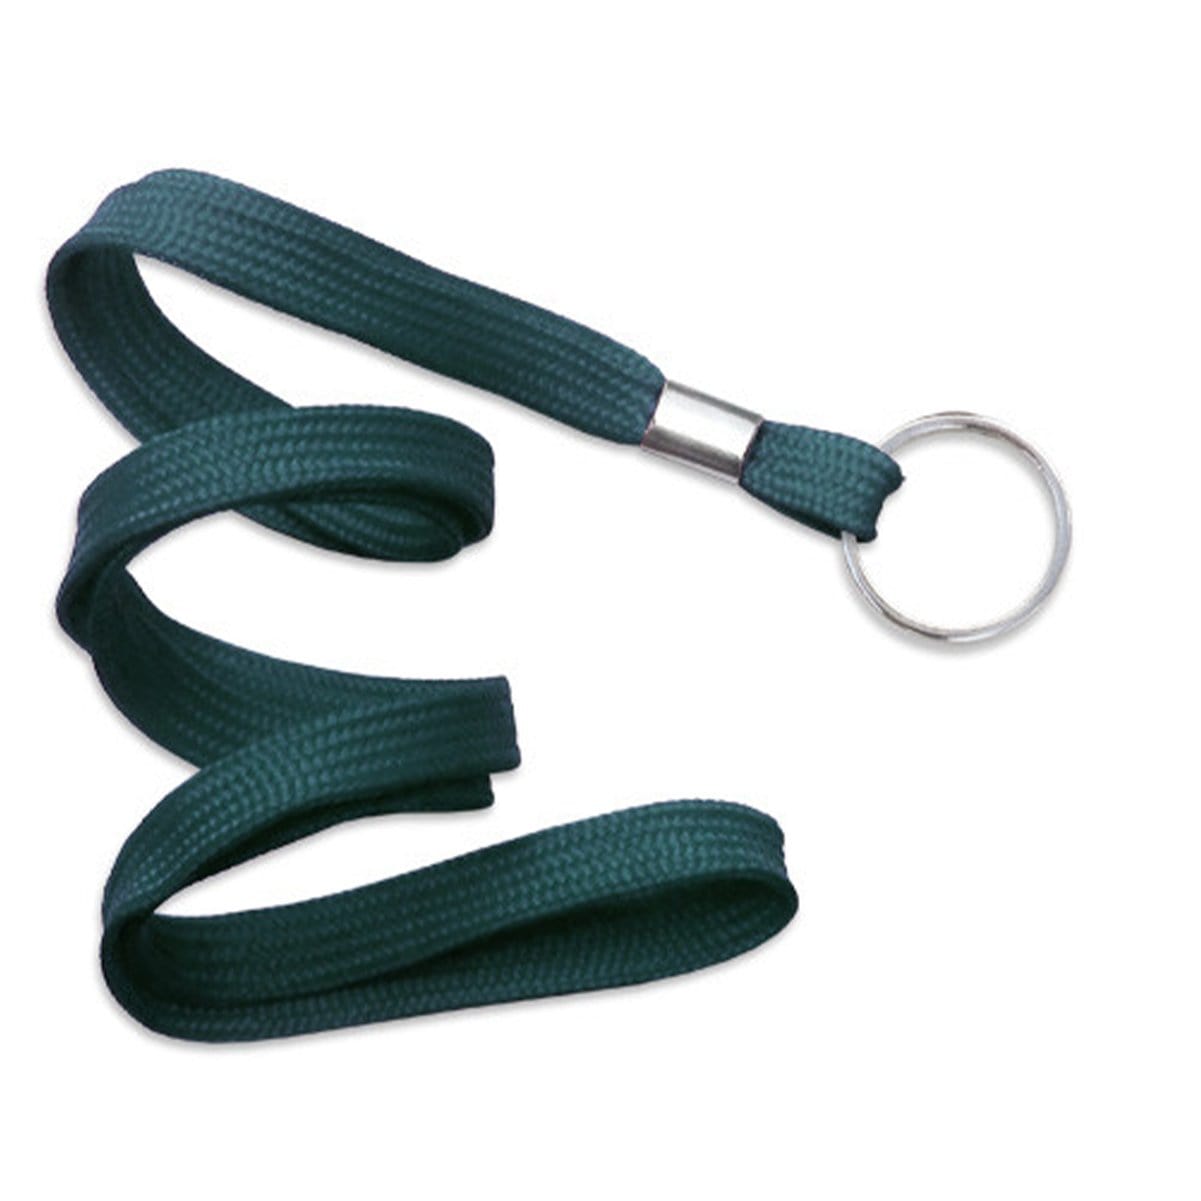 Teal Flat Braid Woven Lanyard With Nickel-Plated Steel Split Ring 2135-365X 2135-3666